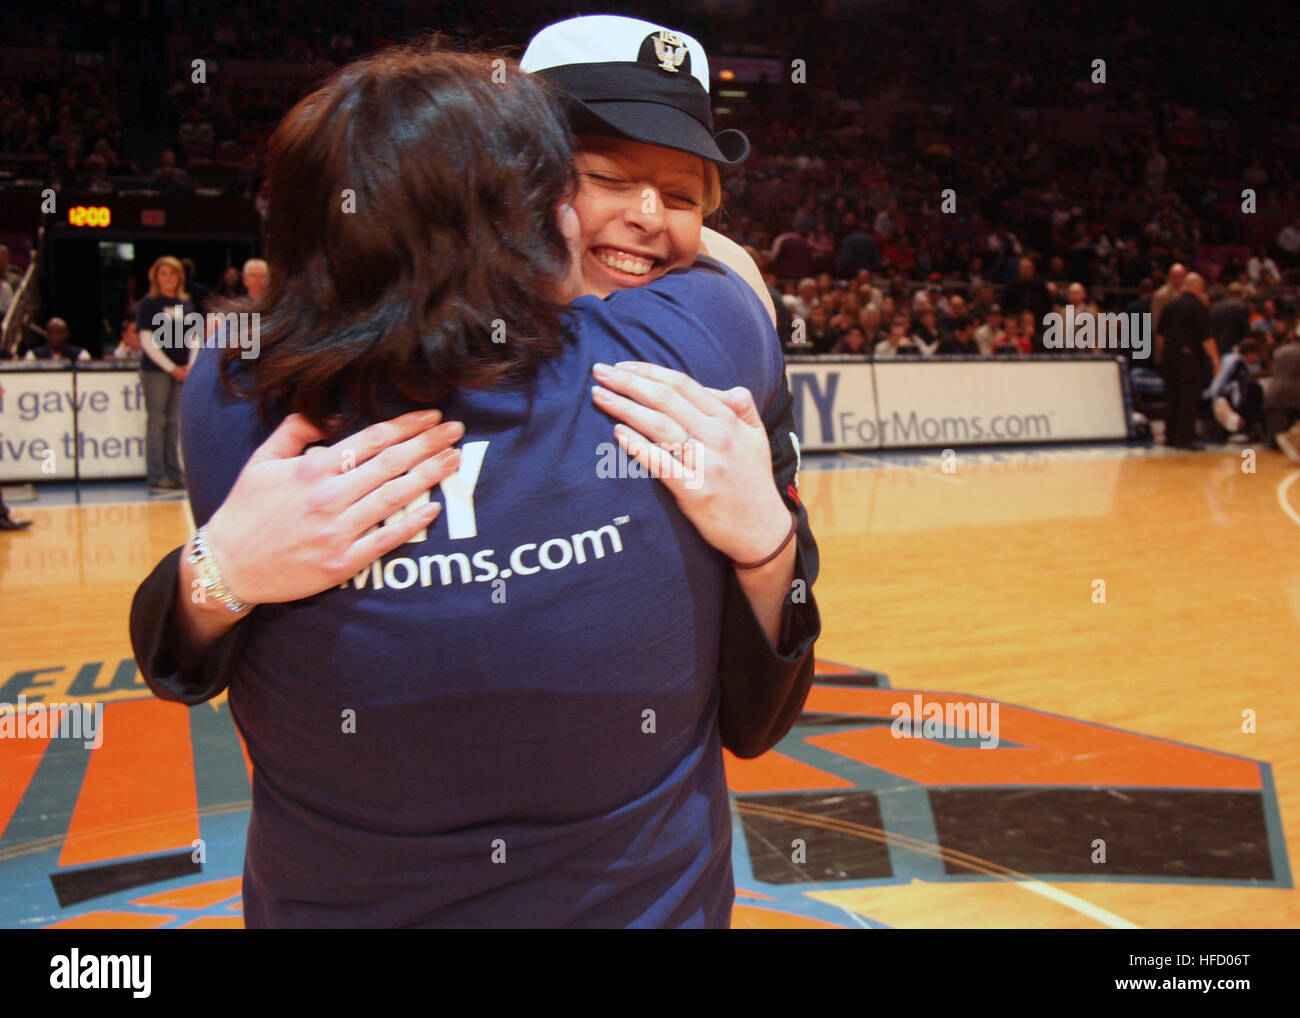 Petty Officer 3rd Class Dana Cox, a firefighter aboard the amphibious assault ship USS Bataan, embraces her mother, Diana Russell, from Lancaster, Penn., during the New York Knicks vs. Utah Jazz basketball game in Manhattan. Their unexpected reunion was arranged as part of a military appreciation event sponsored by NavyForMoms.com, a Web site for mothers of Navy Sailors and mothers who have questions about Navy life. Nearly 1,500 Sailors and Marines from Bataan are in New York for a week of community outreach events, public tours, participation in the city's annual Veterans Day Parade and supp Stock Photo